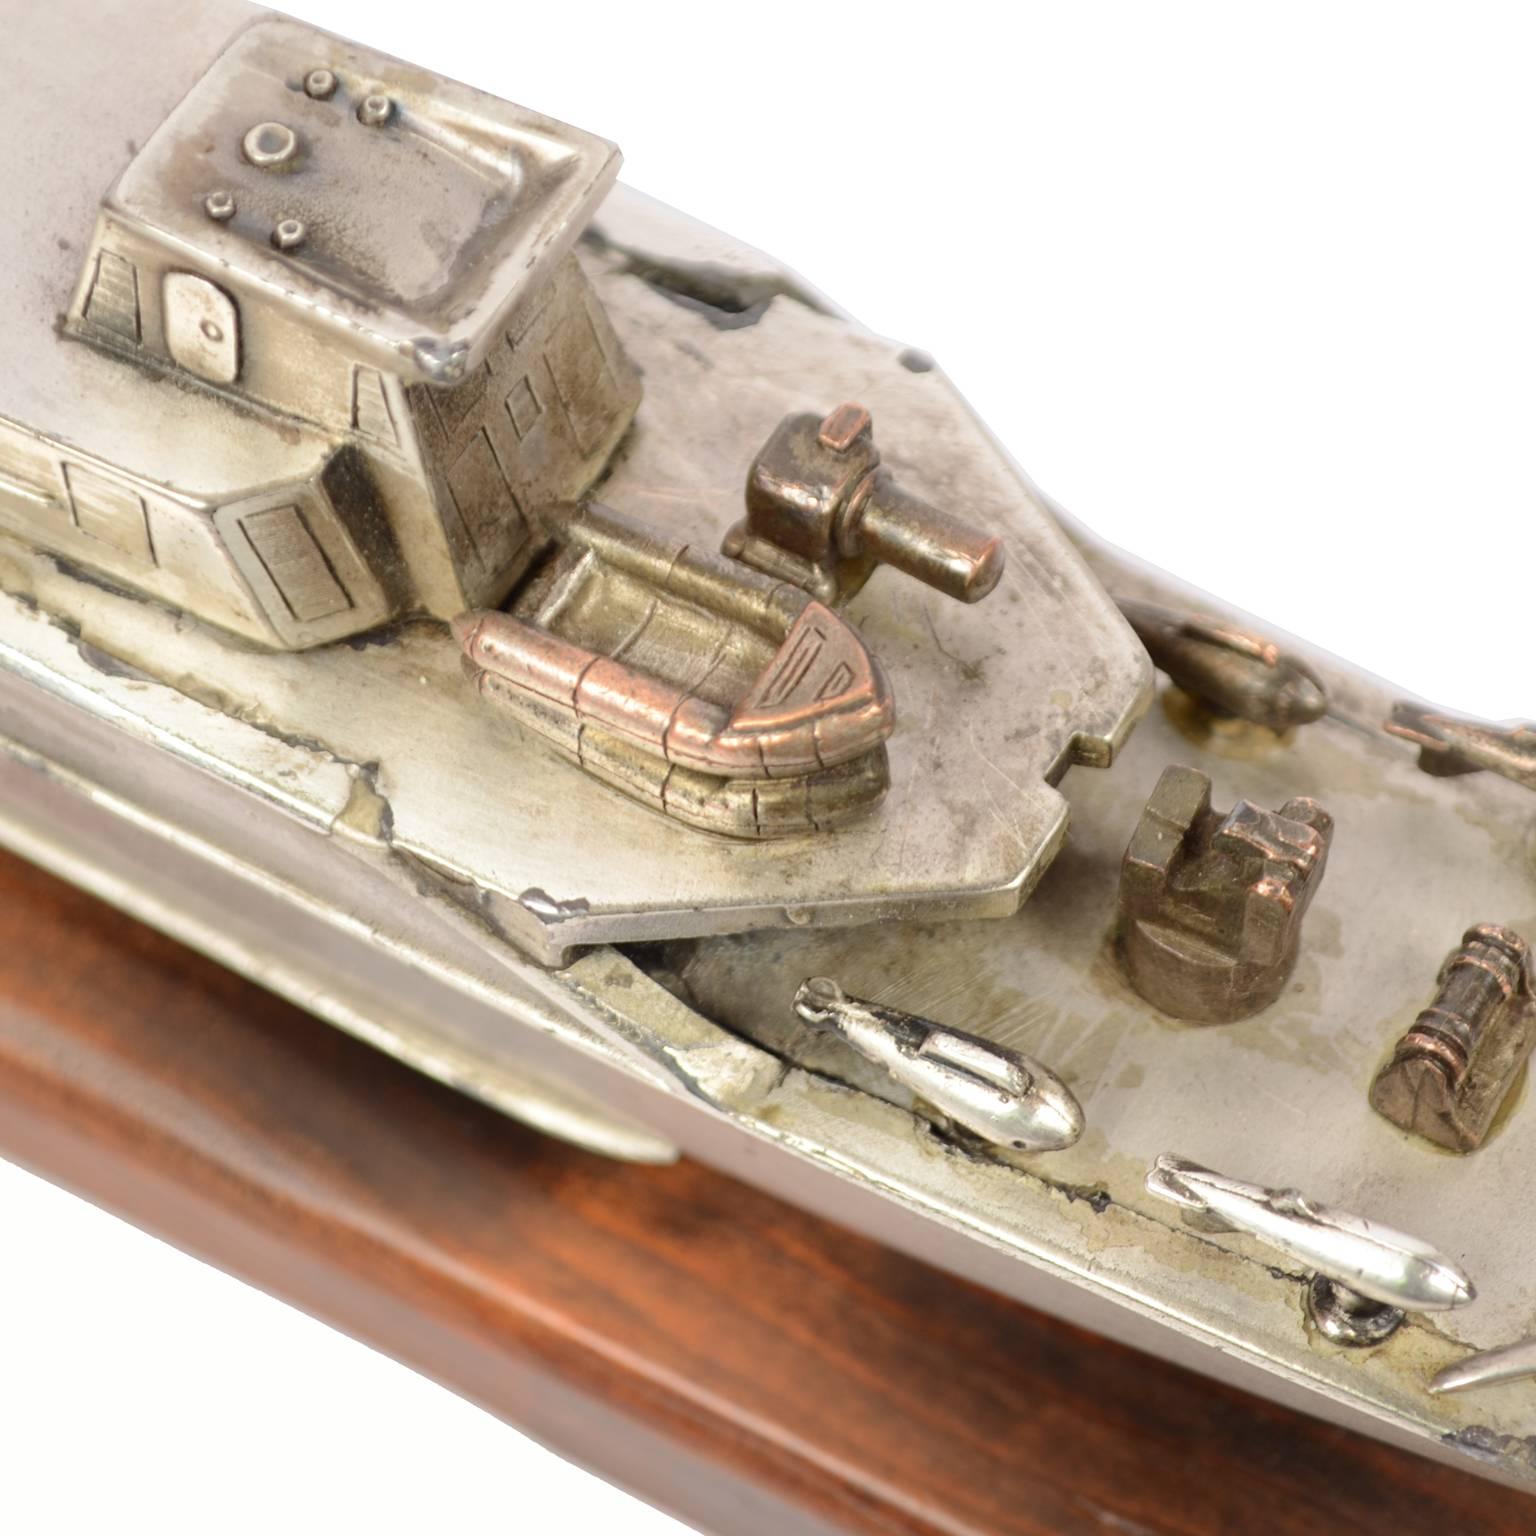 Model of an Italian Navy 5500 ship, made of chromed brass and mounted on a wooden base; made in the 1970s. Measurements of the base cm 35.5 x 5 x total height 7.7 cm. Very good condition.